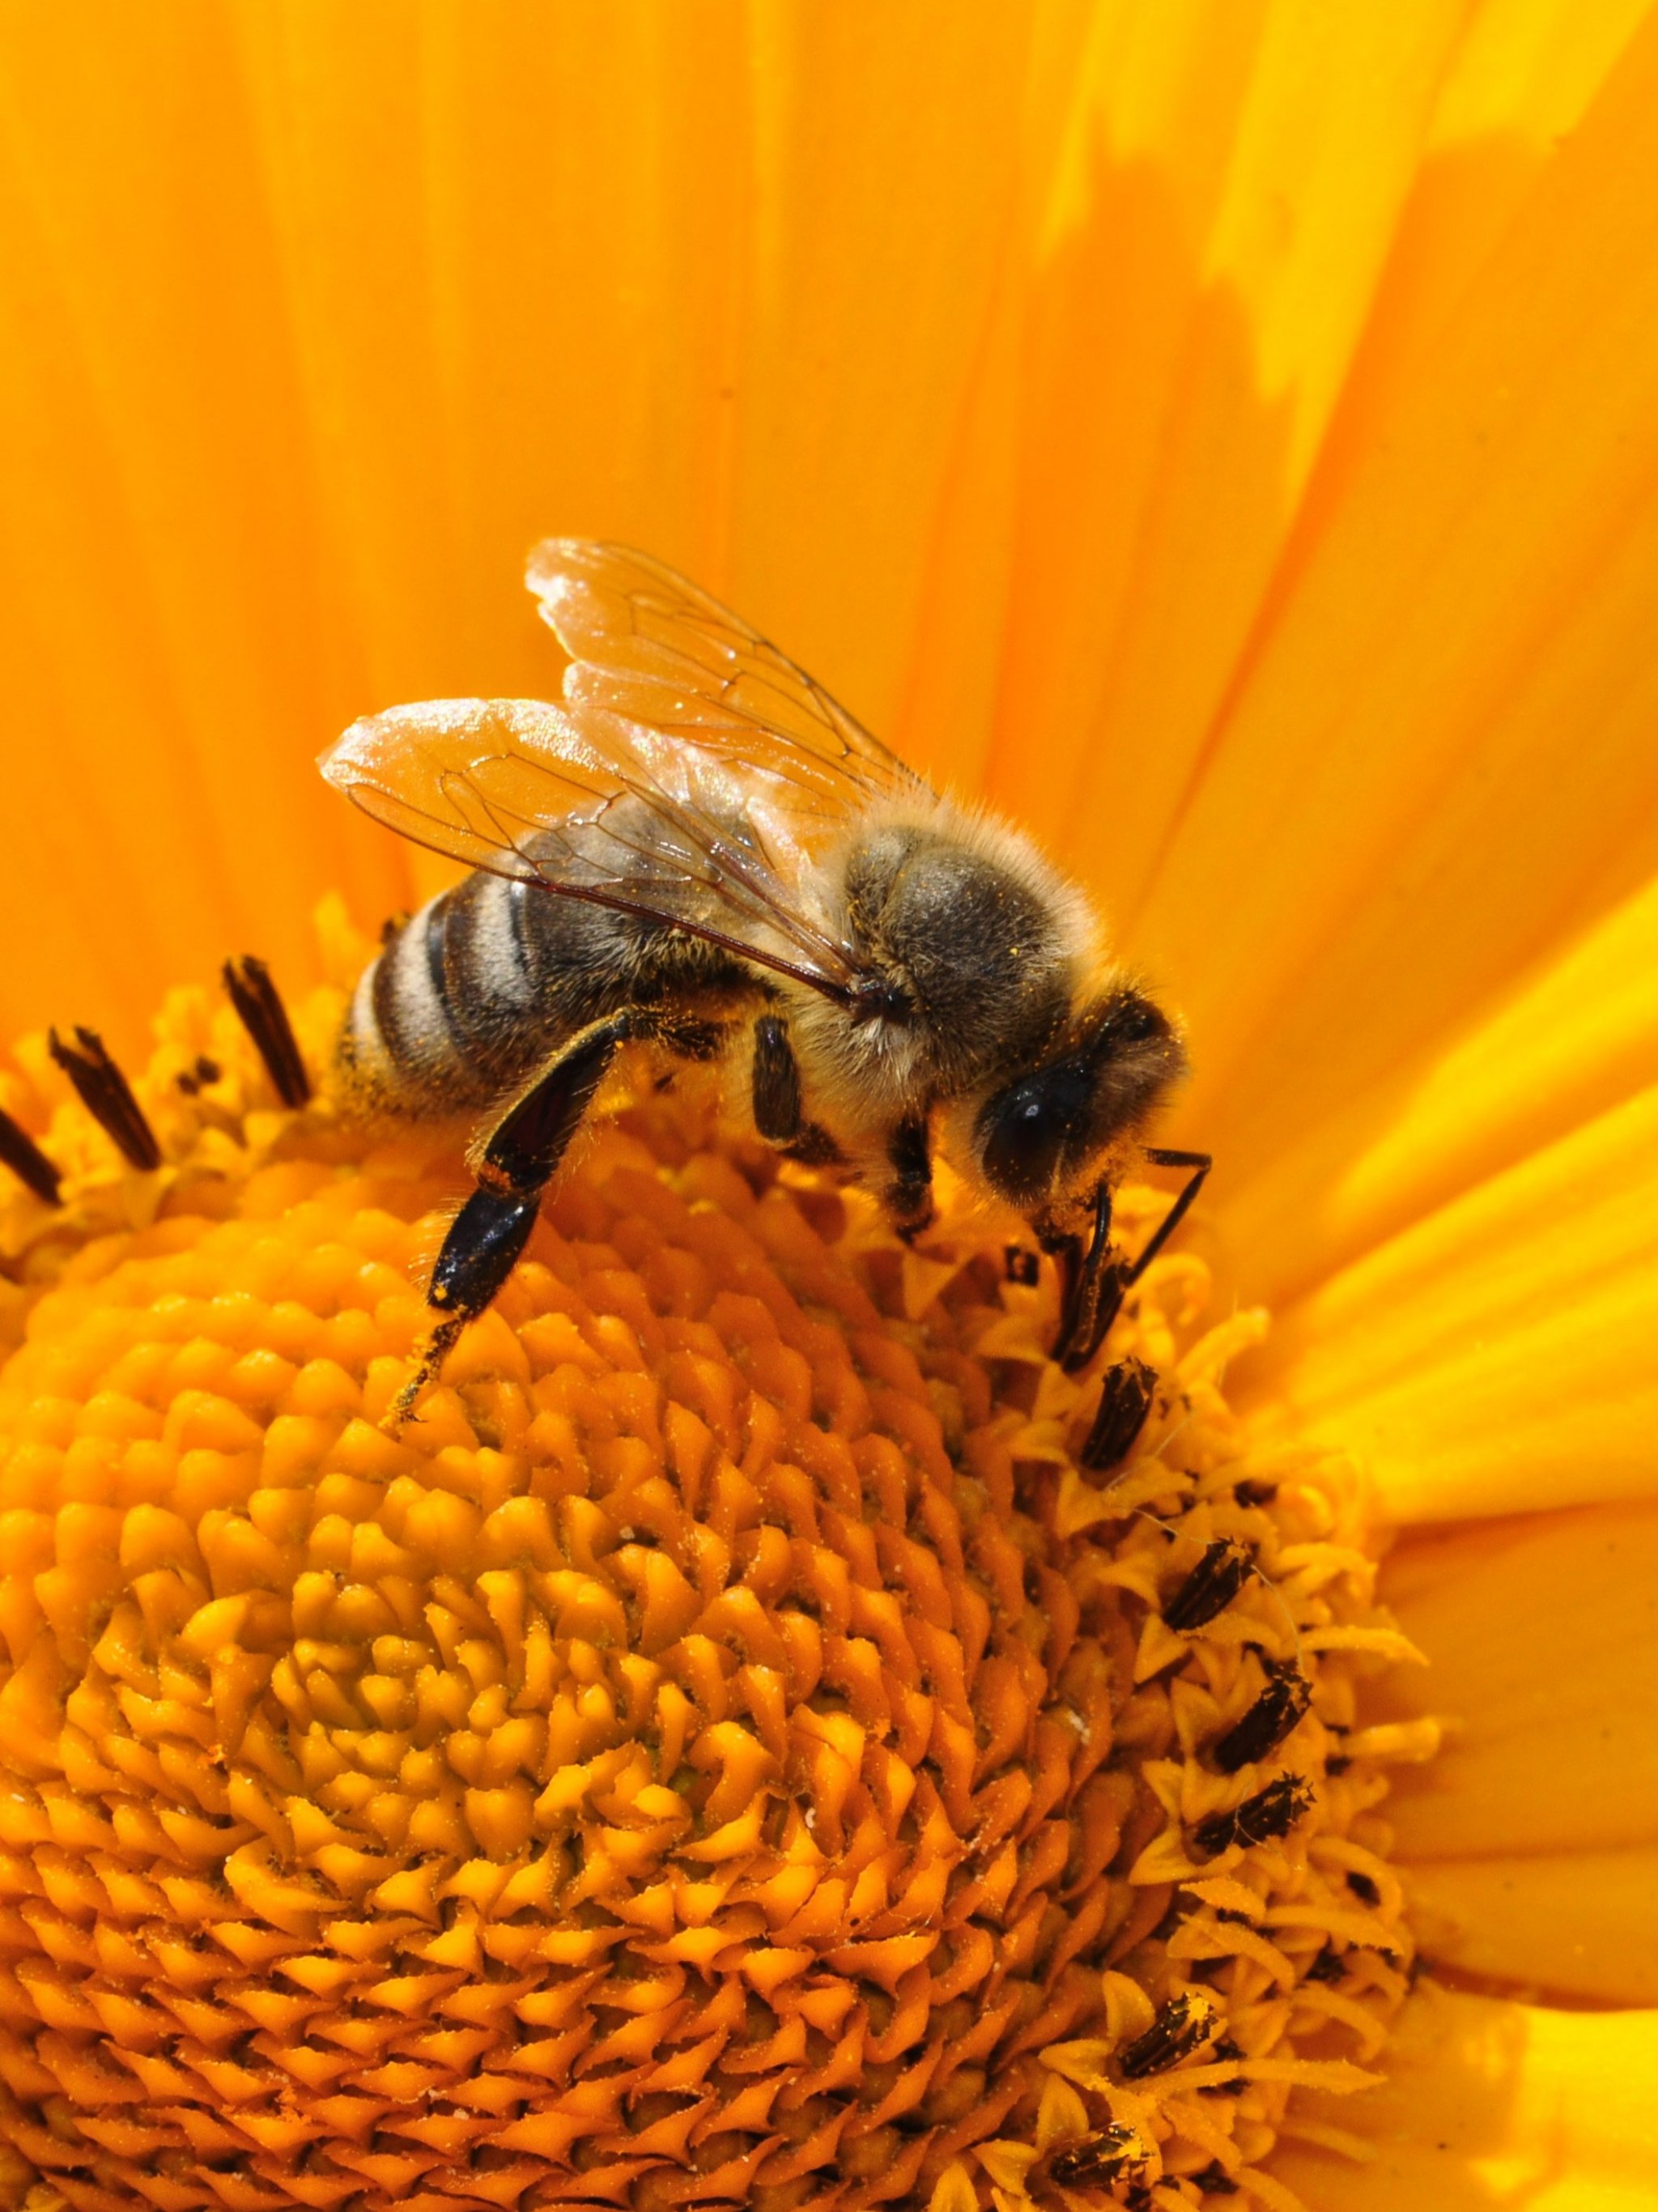 Bee on Sunflower Wallpaper - iPhone, Android & Desktop Backgrounds